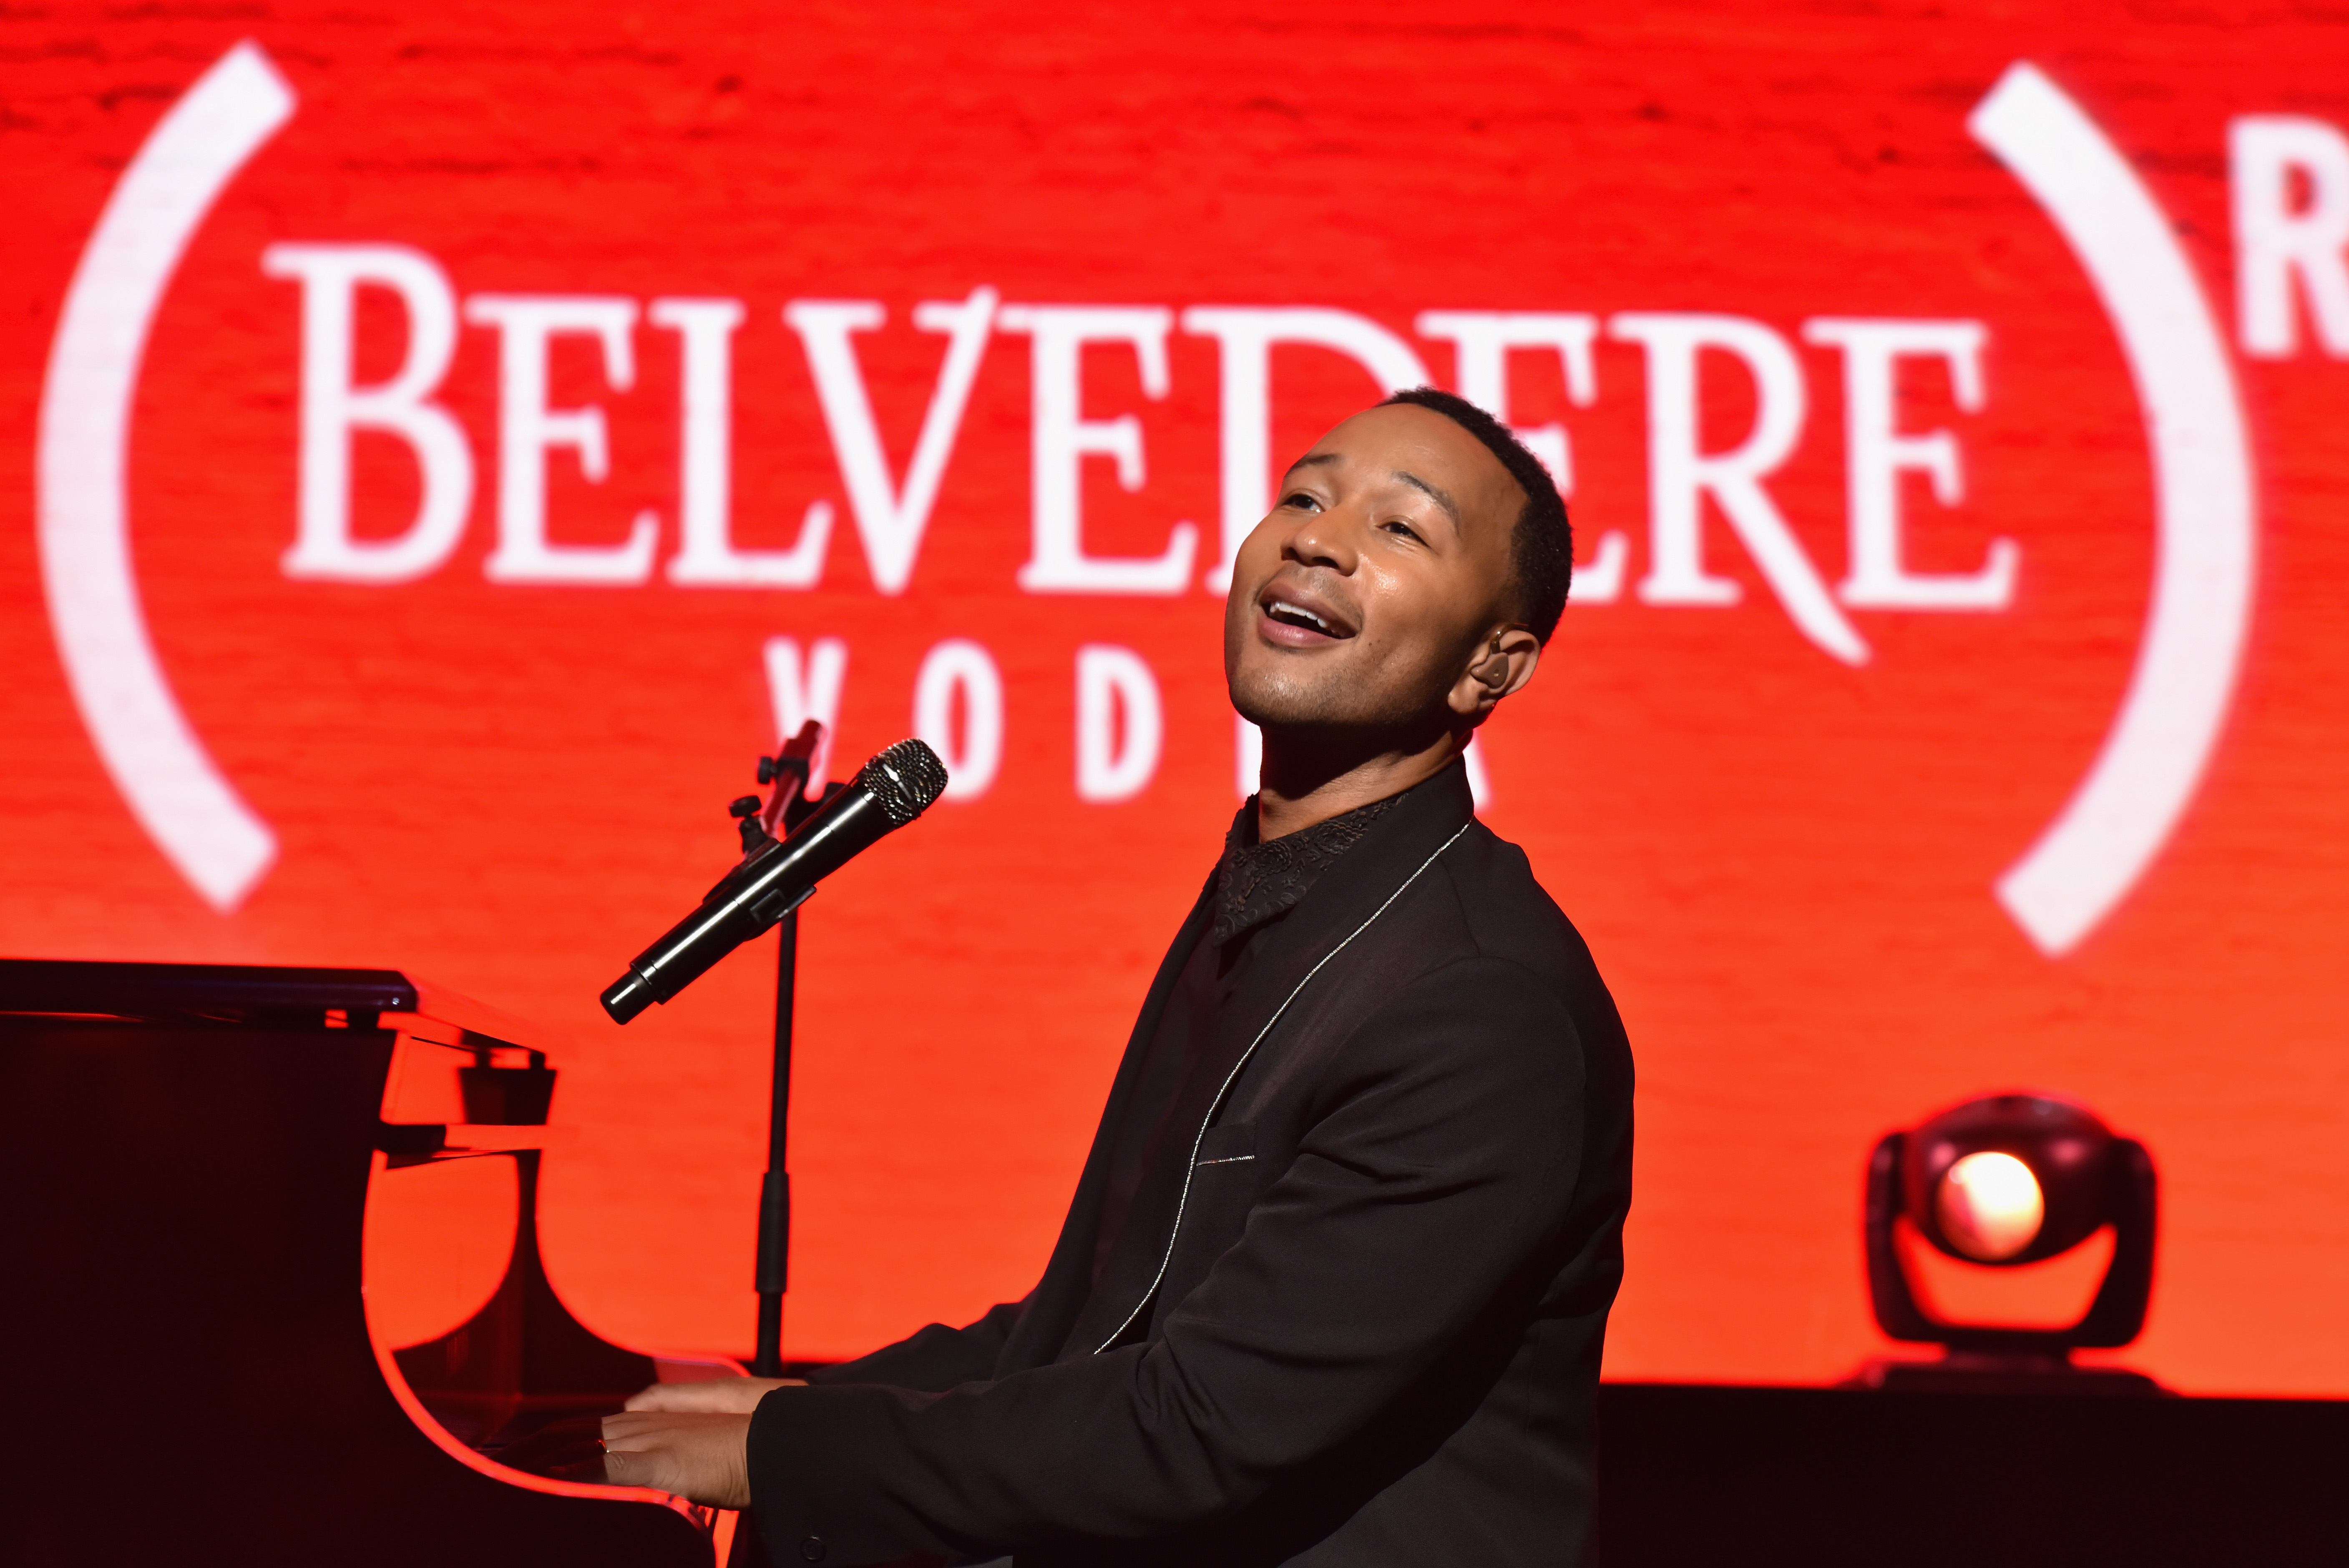 NEW YORK, NY - AUGUST 27: John Legend attends the Belvedere Presents One Night for Life with John Legend at the Apollo Theater at The Apollo Theater on August 27, 2016 in New York City. (Photo by Jared Siskin/Patrick McMullan via Getty Images)